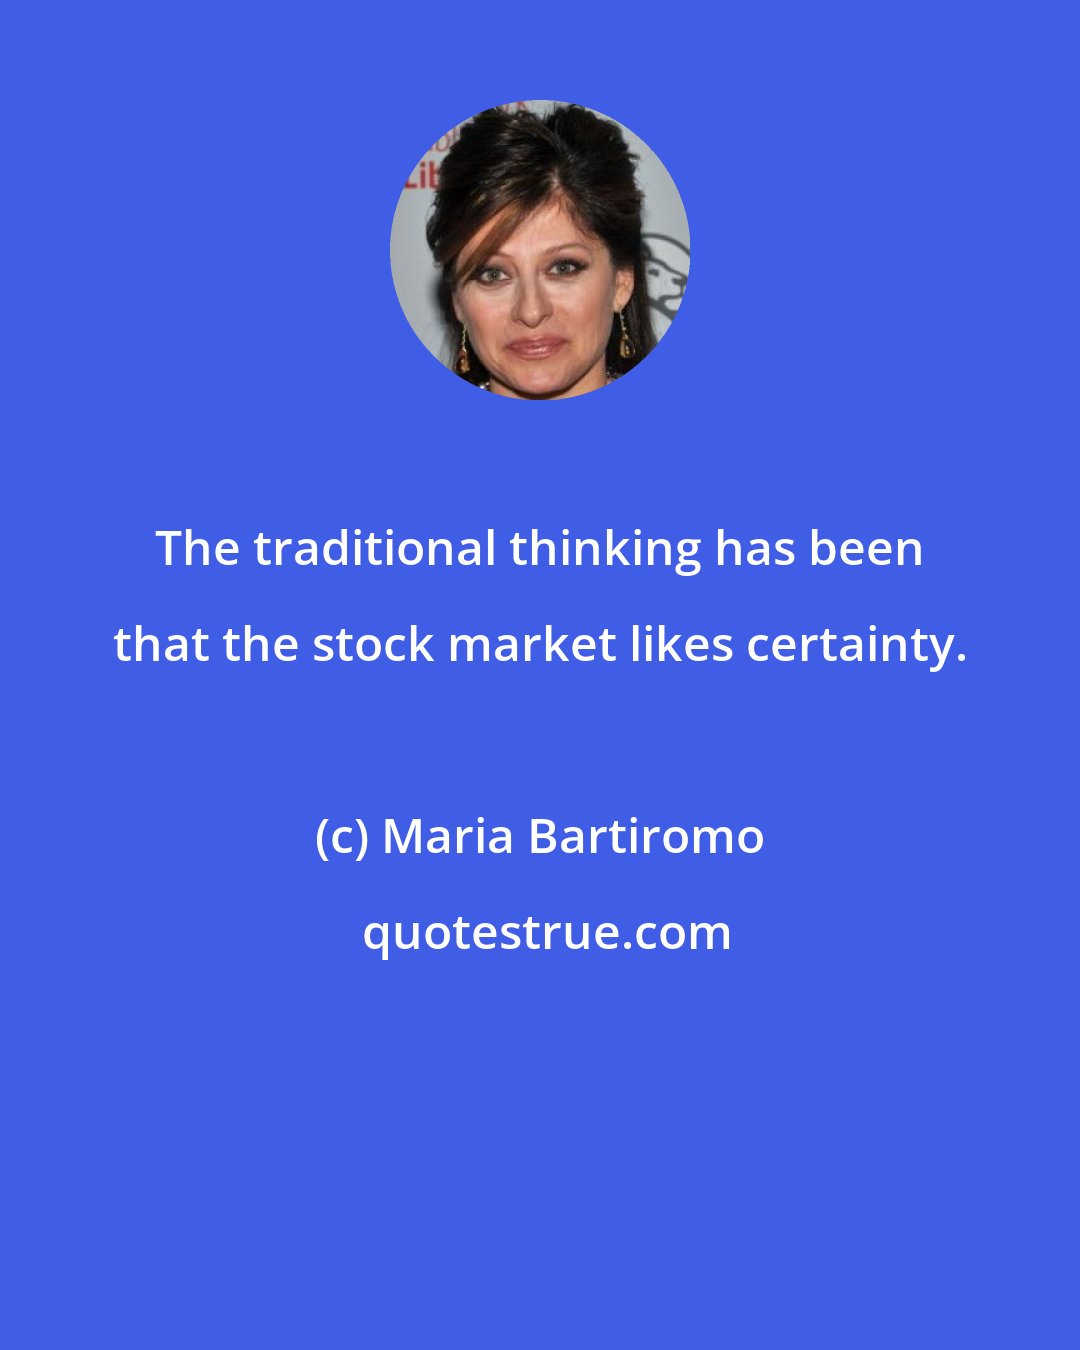 Maria Bartiromo: The traditional thinking has been that the stock market likes certainty.